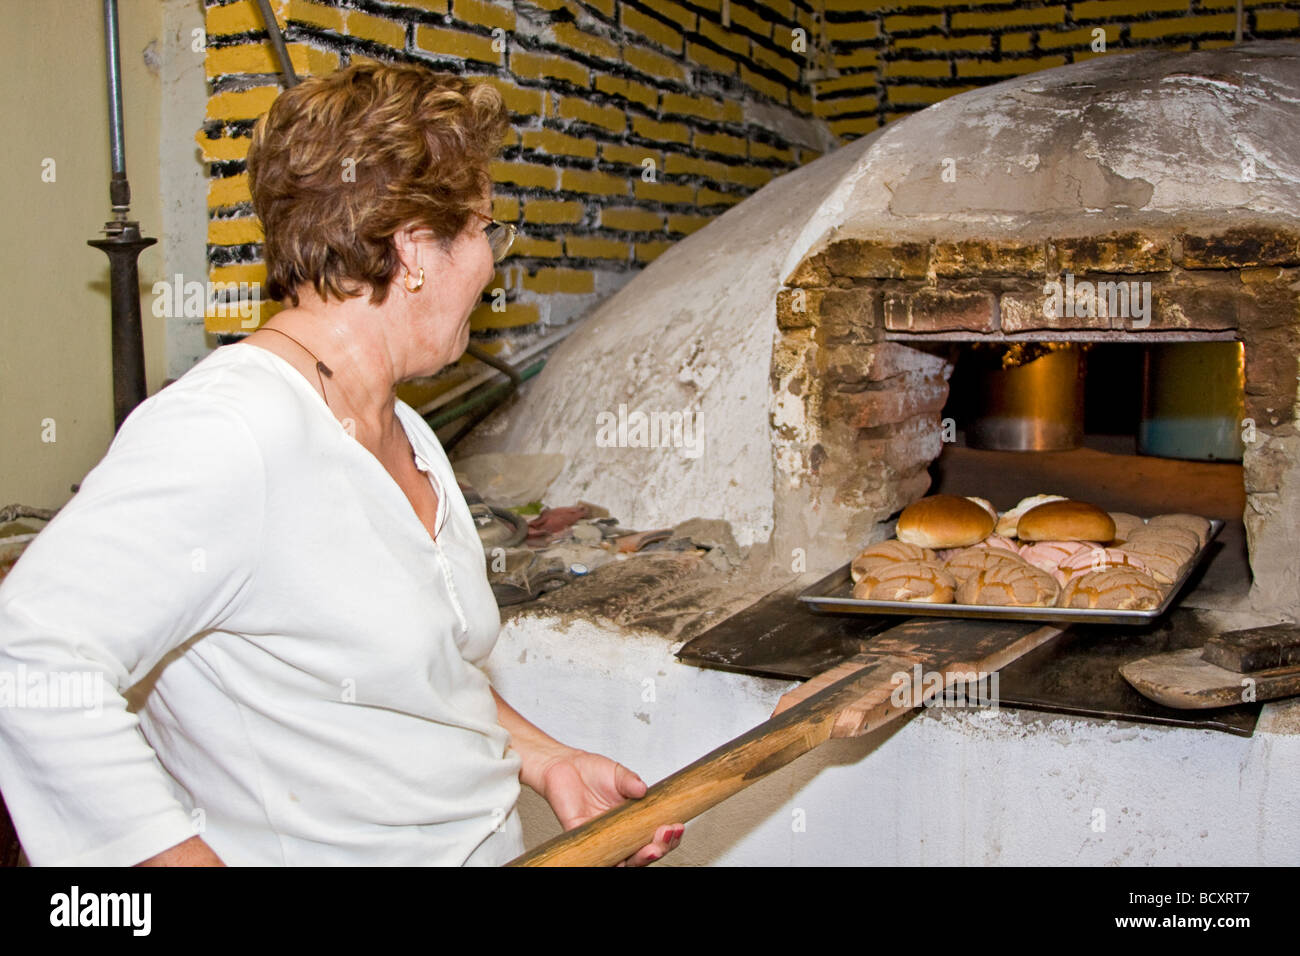 https://c8.alamy.com/comp/BCXRT7/woman-puts-bread-in-traditional-clay-oven-used-to-bake-bread-in-el-BCXRT7.jpg